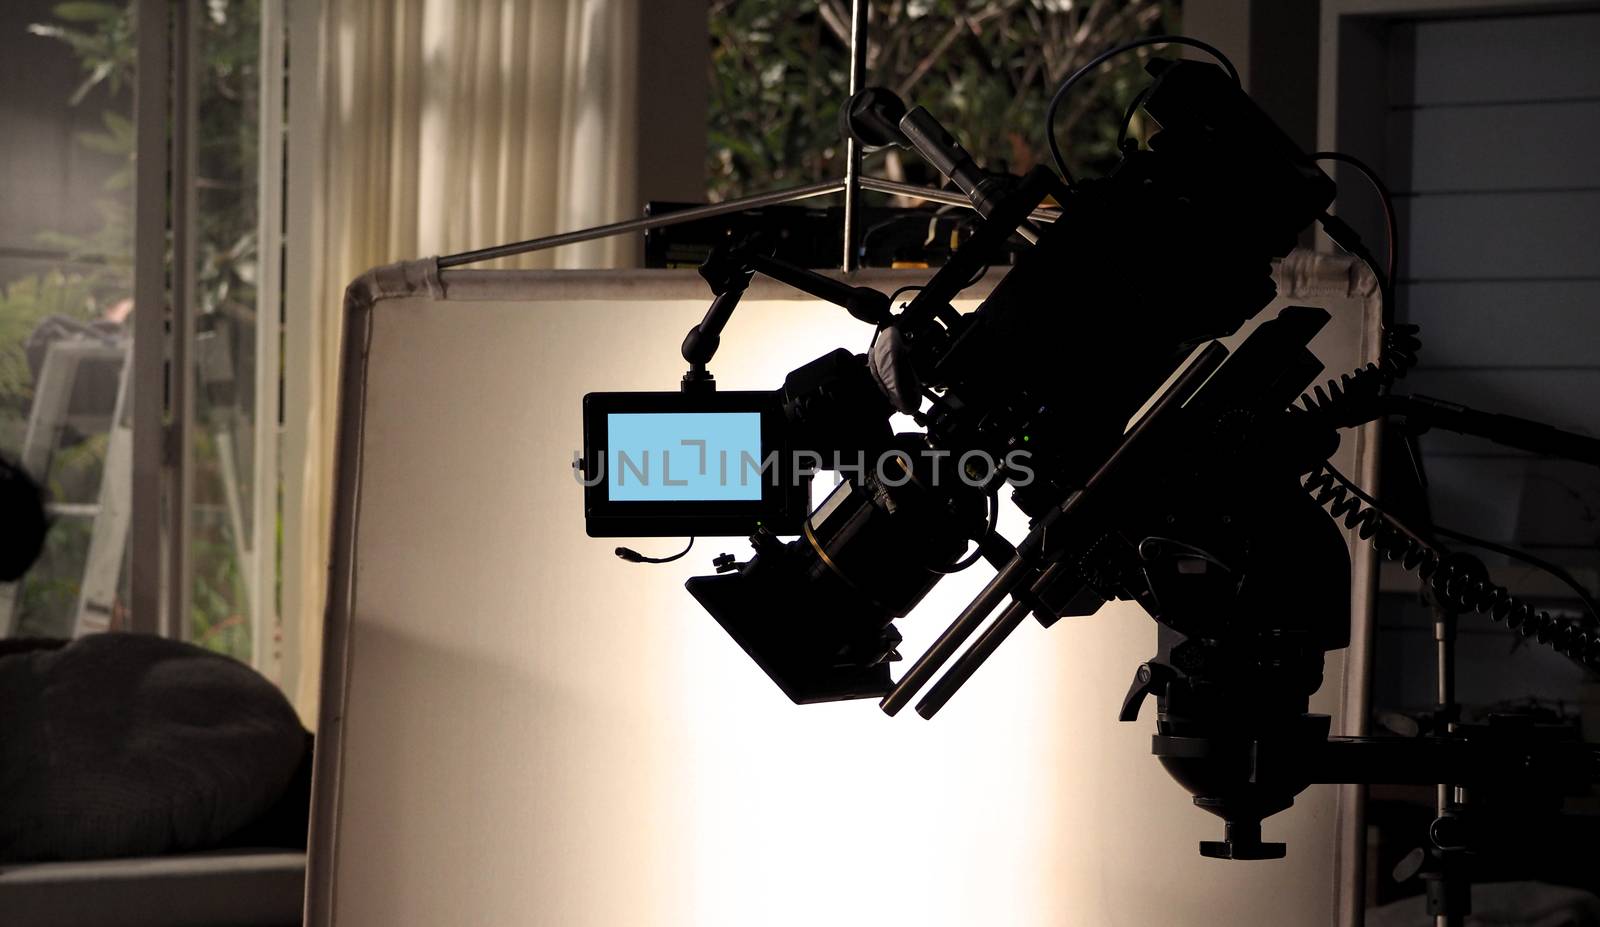 Silhouette images of video camera in tv commercial studio produc by gnepphoto